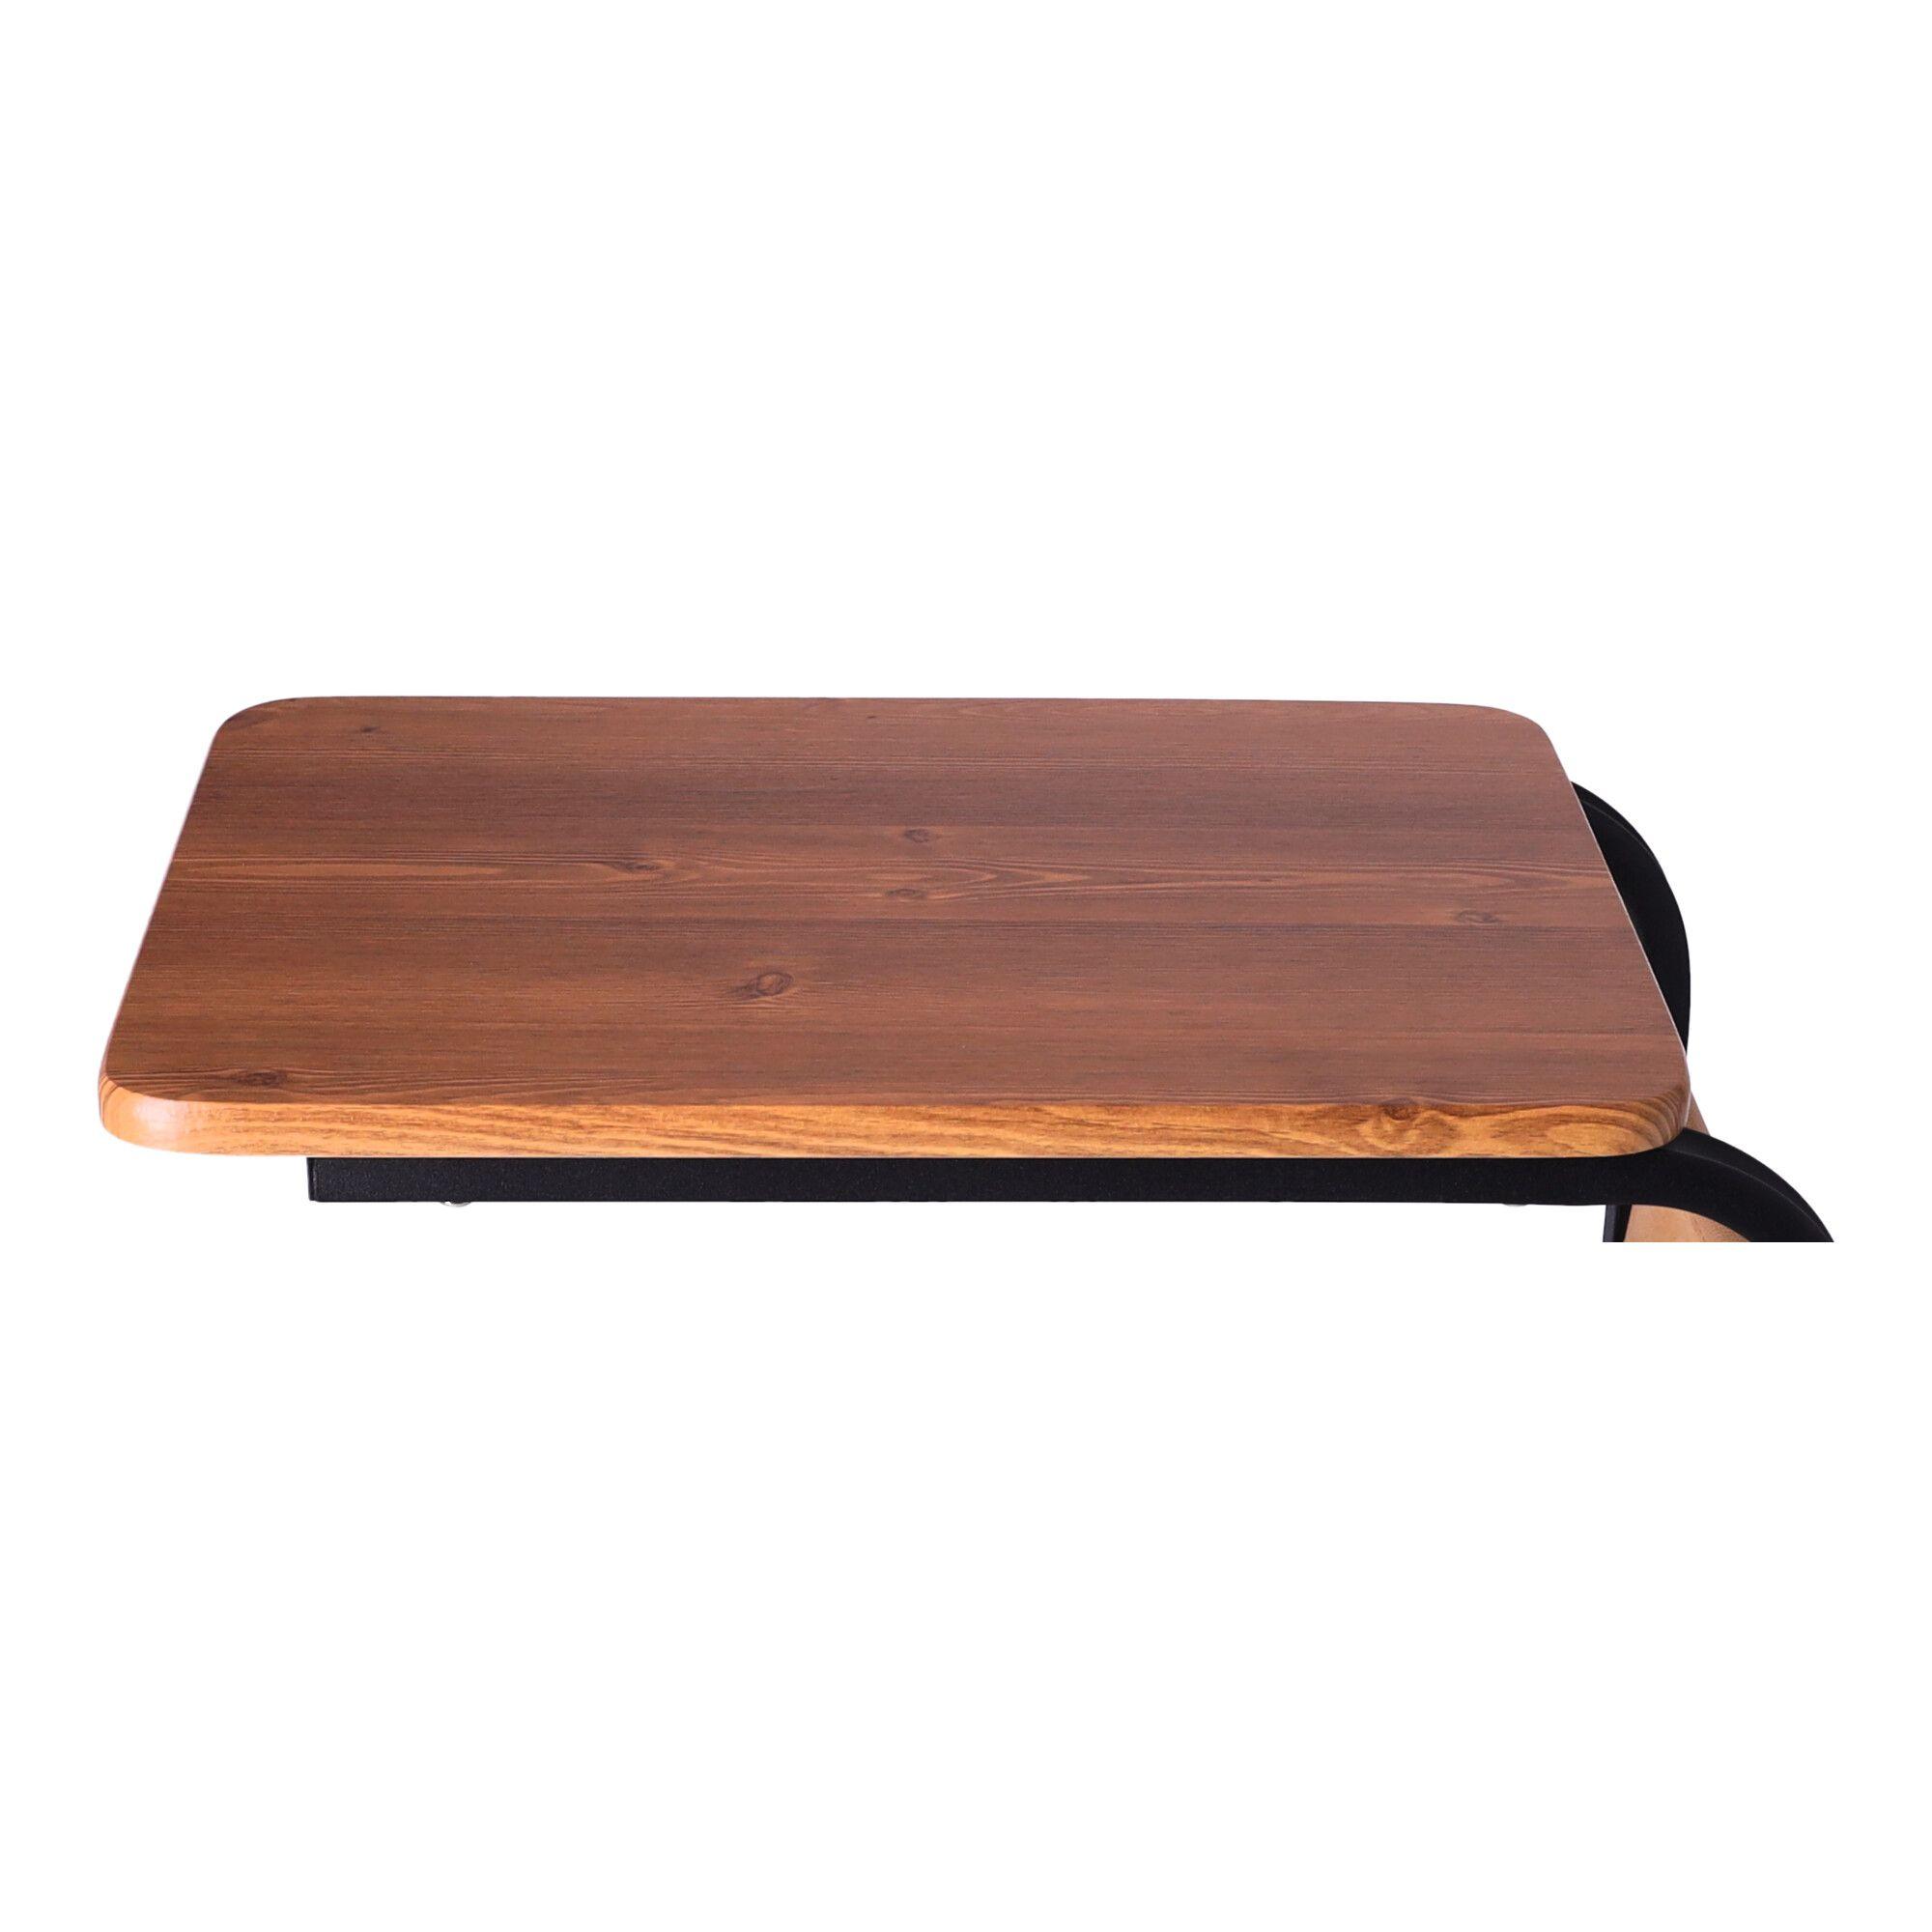 Mobile coffee table / Side coffee table on wheels - dark color